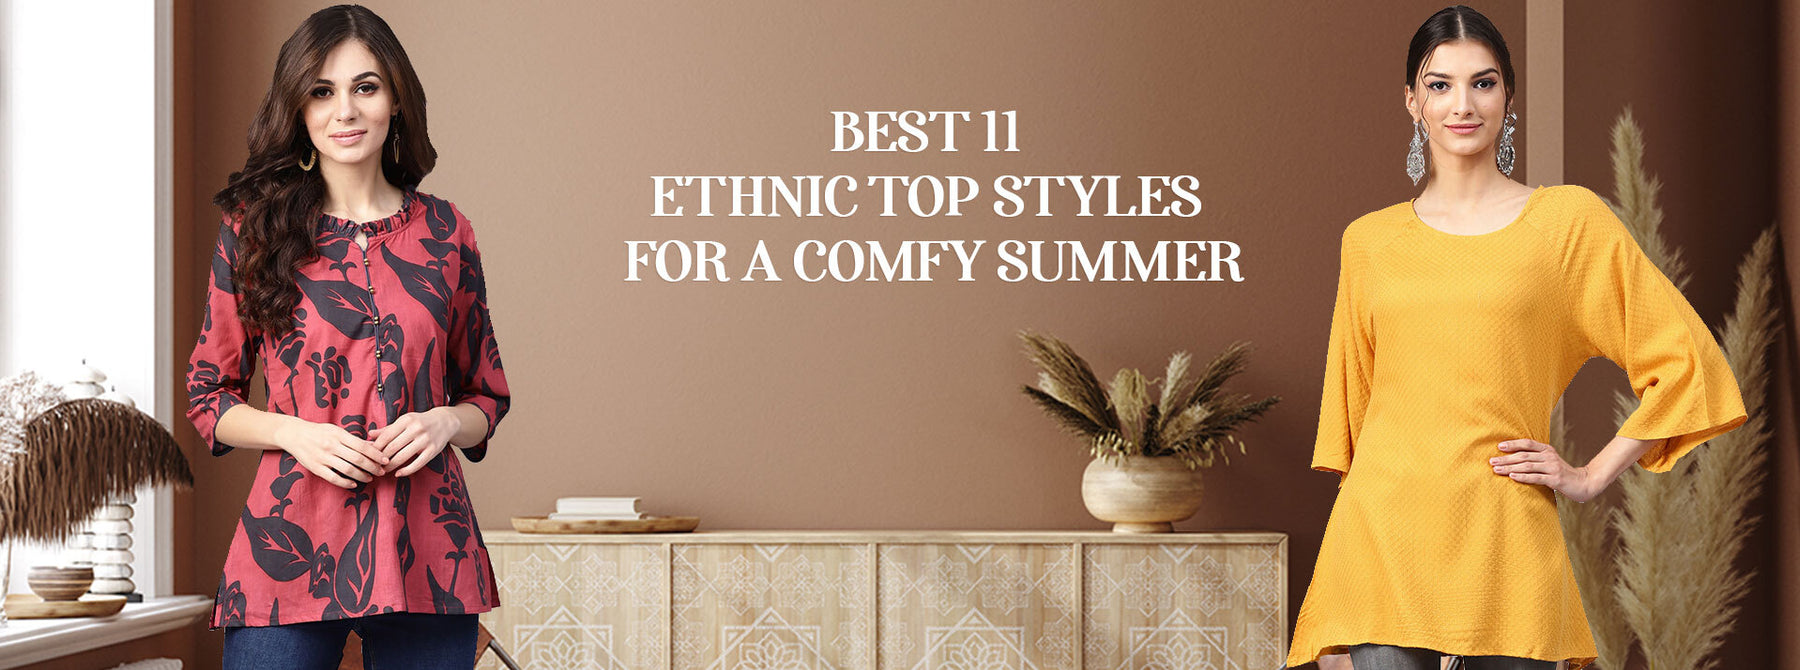 The Best 11 Ethnic Top Styles for a Comfy Summer